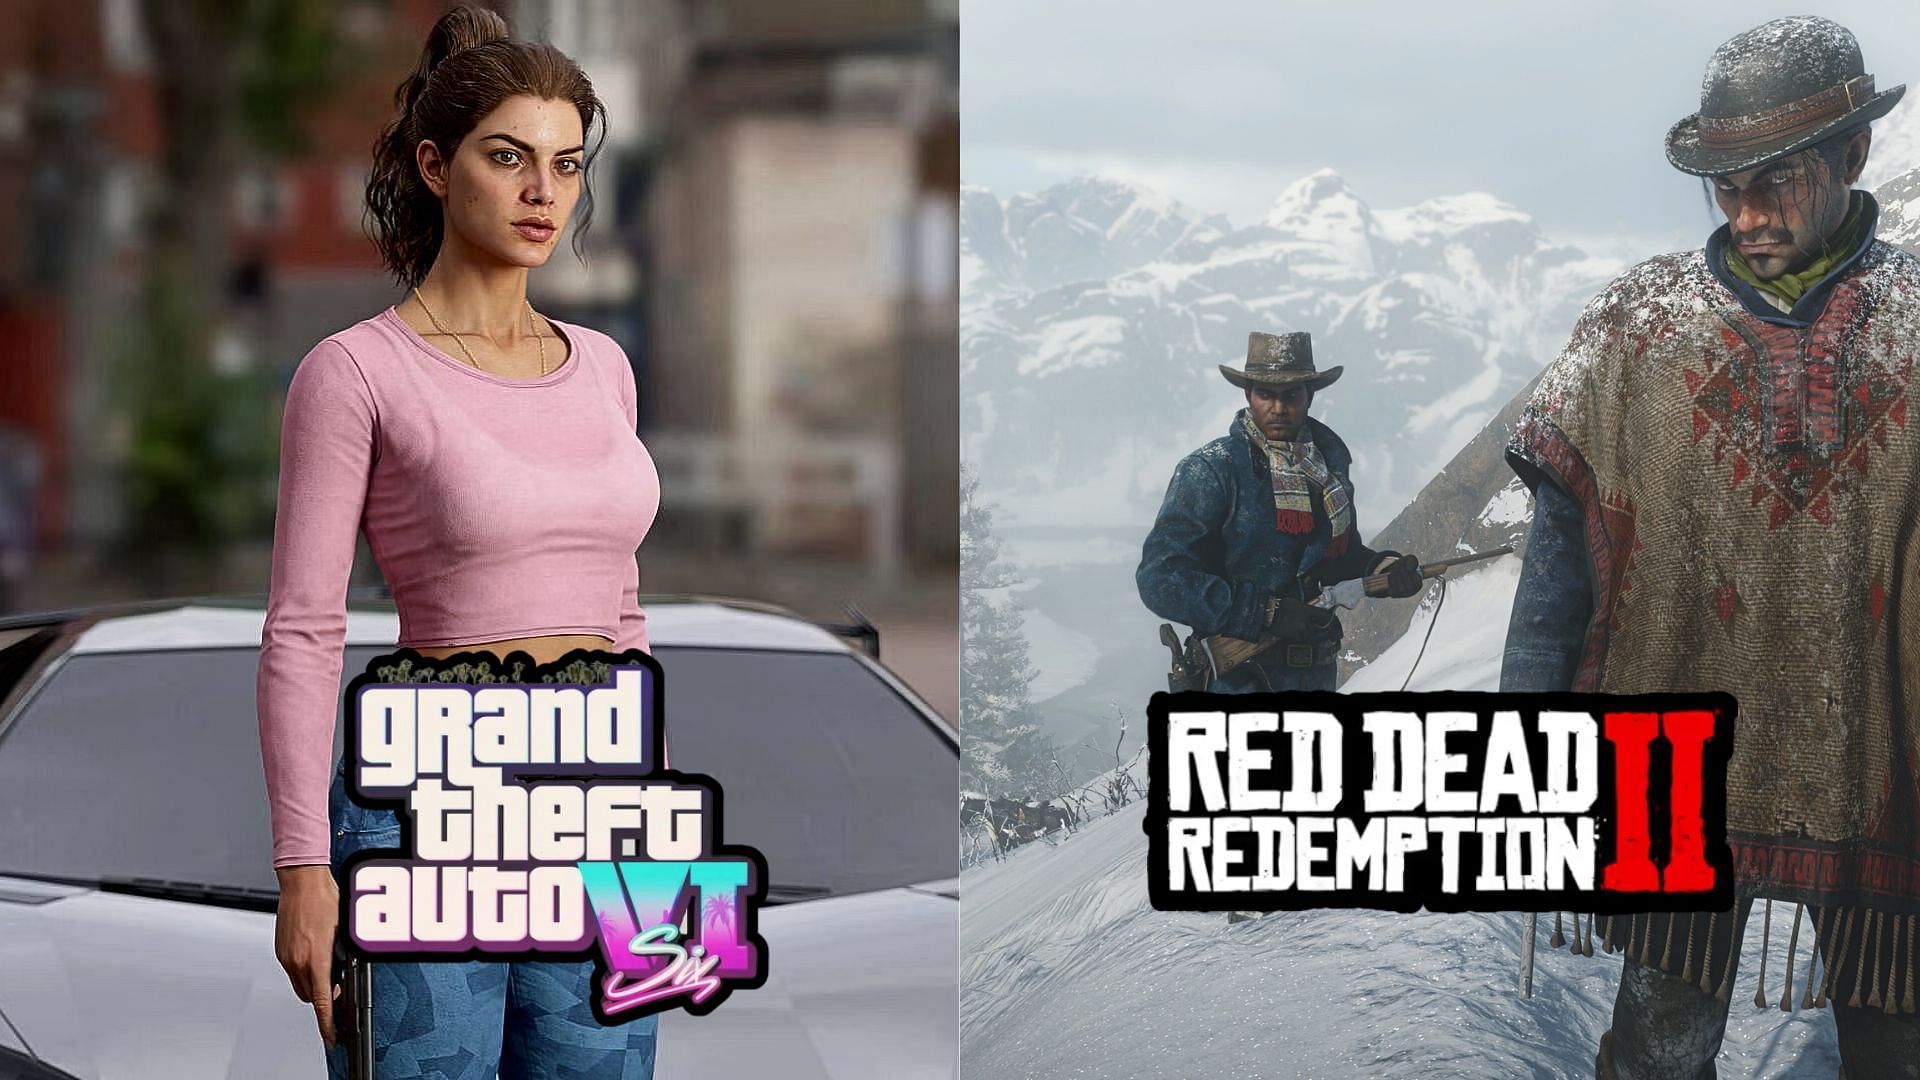  5 Red Dead Redemption 2 features that could make their way to GTA 6